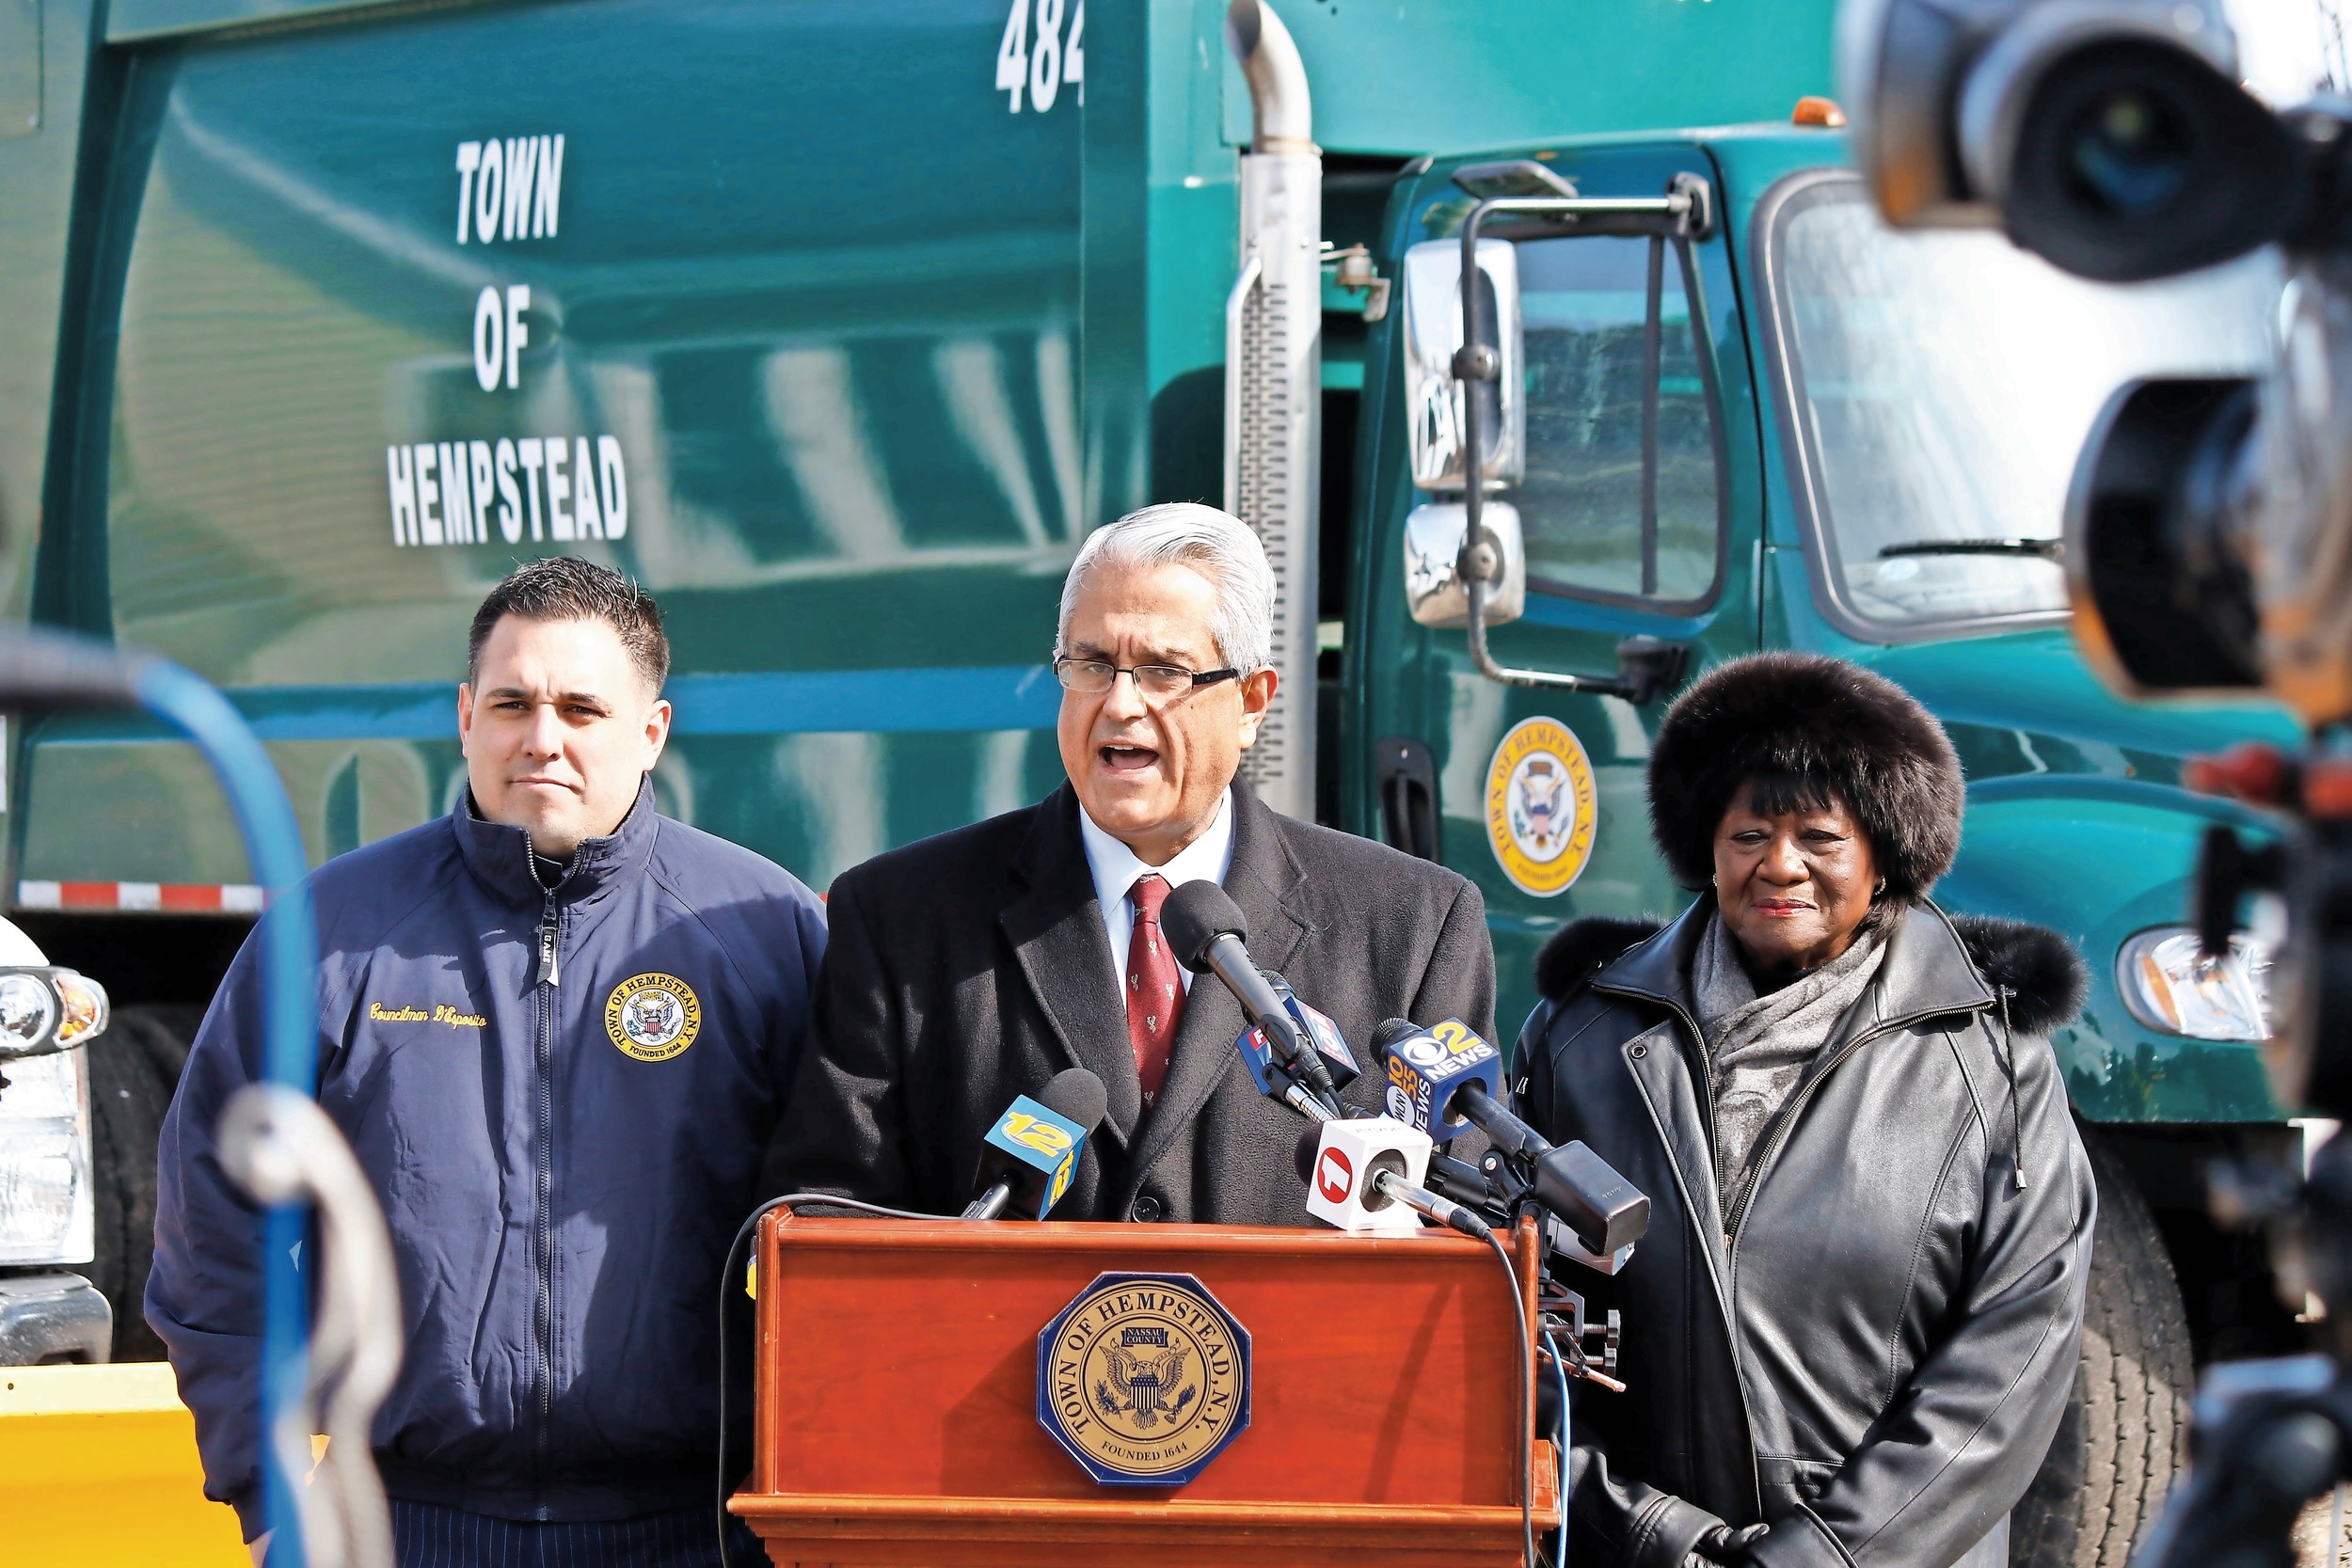 Town of Hempstead Supervisor Anthony Santino, center, urged people to stay home during Tuesday's predicted snowstorm, which he said would likely be the 'big one.' He was joined by, left, Councilman Anthony D'Esposito and Councilwoman Dorothy Goosby for a news conference in Point Lookout, where coastal erosion was possible.